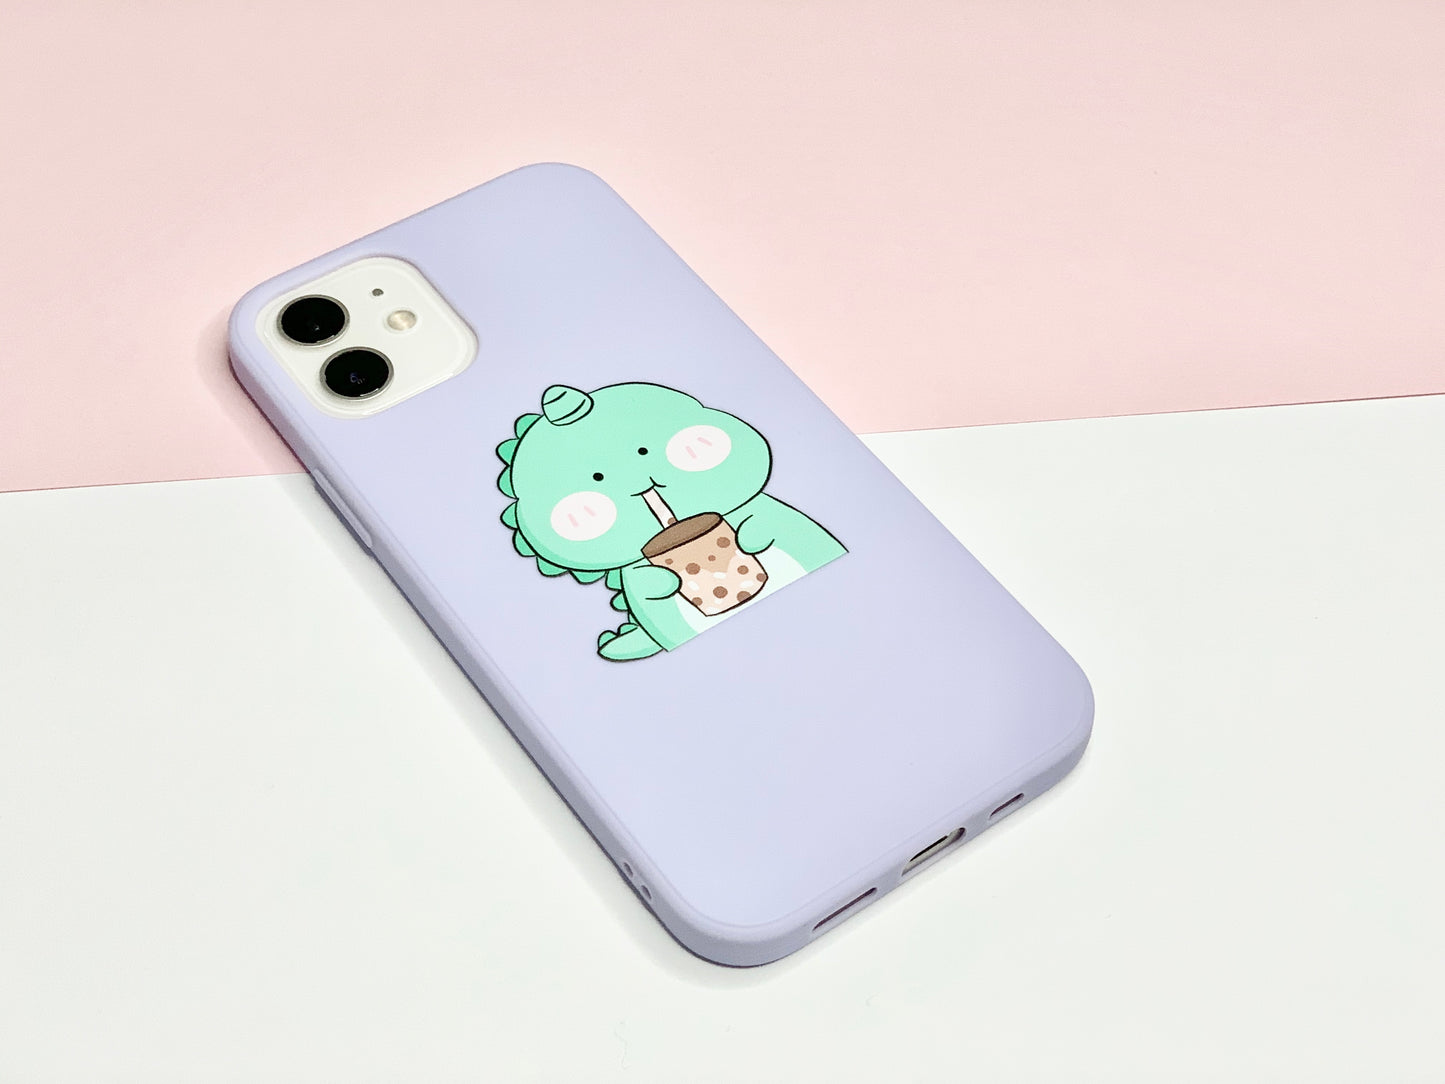 Coral and Ink's purple iPhone case is shown from a side angle. The case has a green dinosaur on it that is drinking Boba from a straw